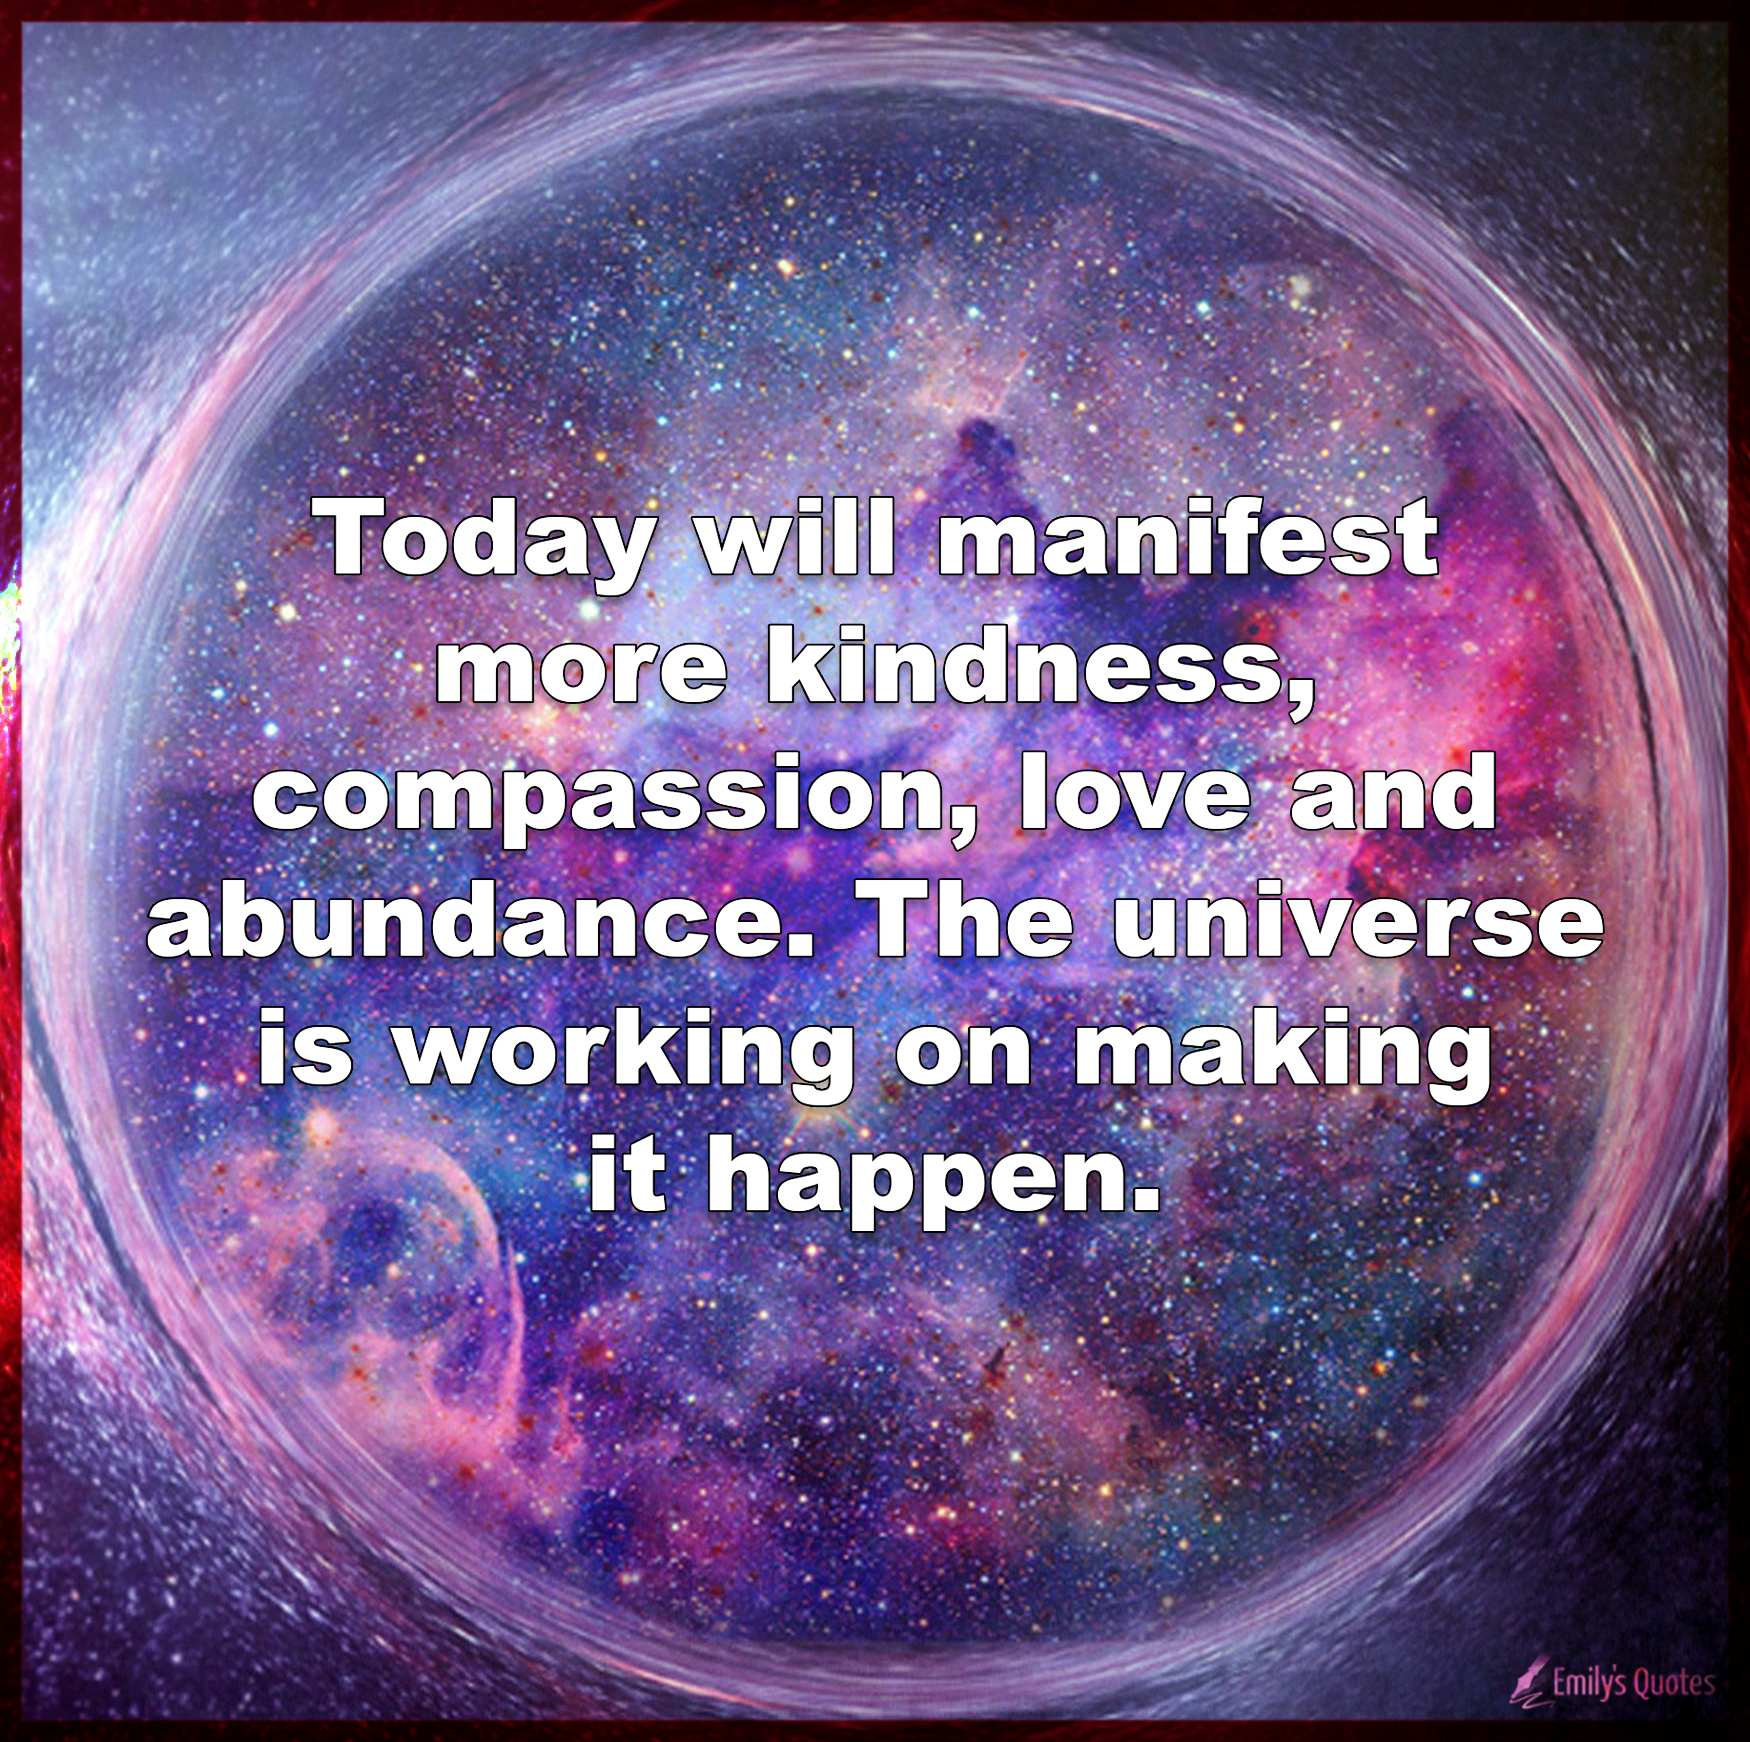 Today will manifest more kindness, compassion, love and abundance. The universe